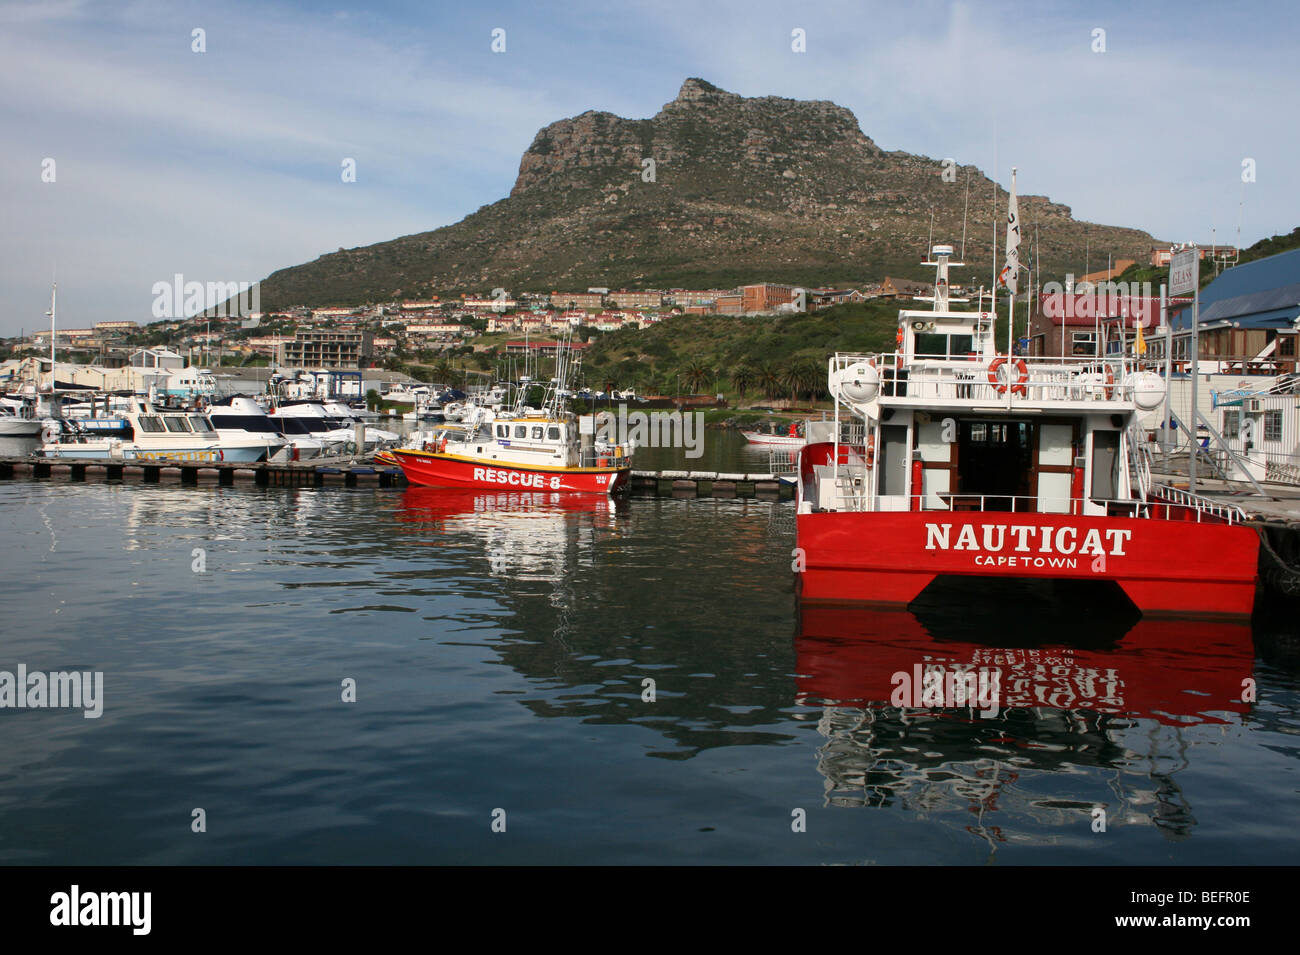 Catamarans And Boats In The Harbour At Hout Bay With Sentinel Peak In The Distance, South Africa Stock Photo